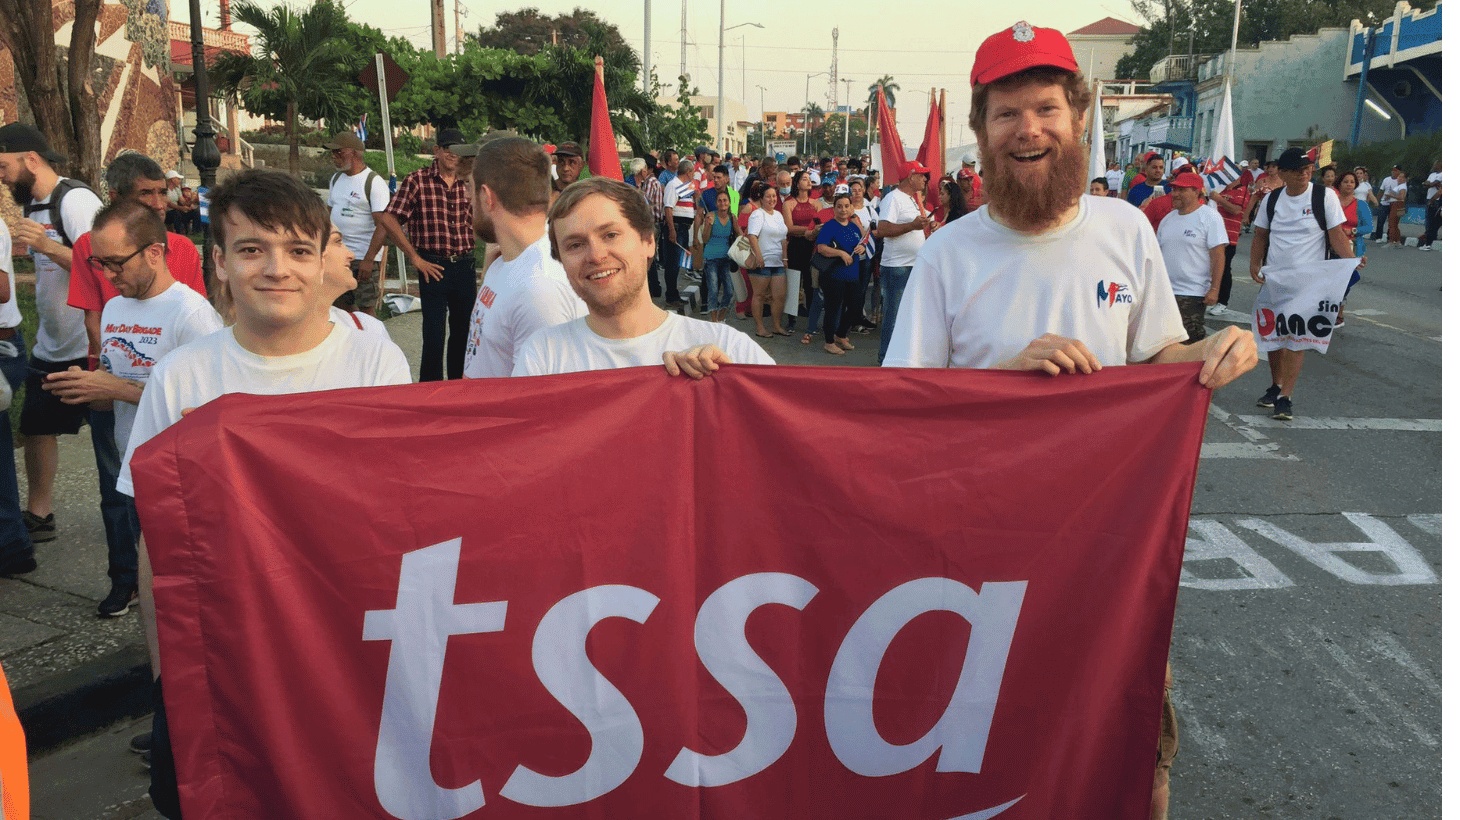 Three young men, holding a huge red TSSA  flag, and smiling happily on a street in Cuba. Will Boisseau with his big red beard, wearing a red baseball cap is on the right of the flag.